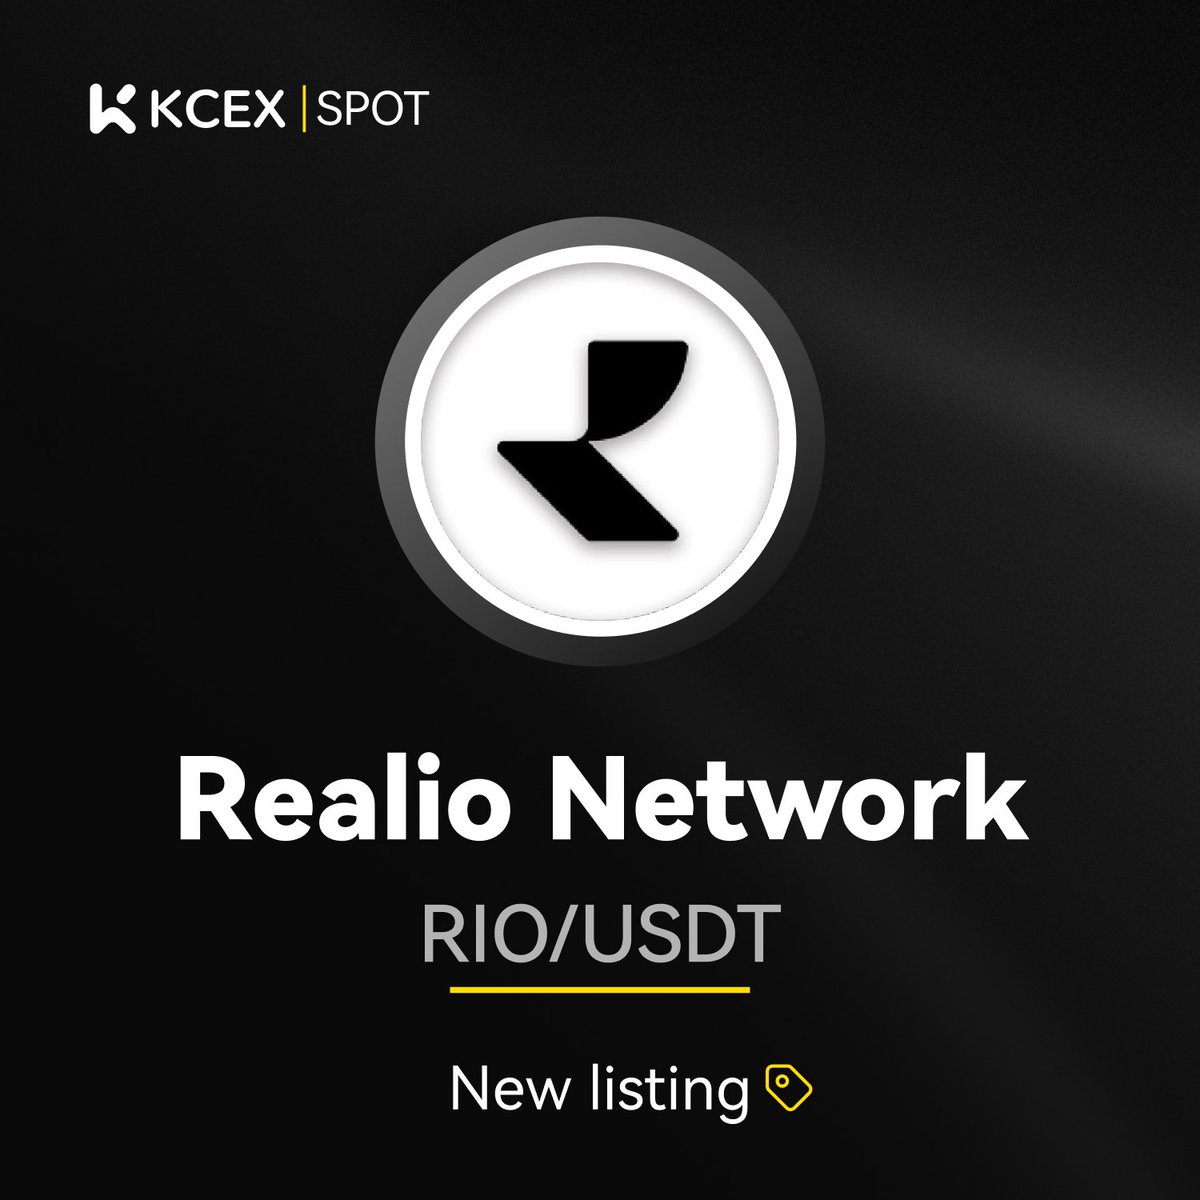 #KCEX New Listing  
🚀 The #Realio Network ( $RIO) joins KCEX's spot trading market! Discover an end-to-end, blockchain-based SaaS platform for digital securities and cryptoassets. Follow @realio_network  for updates.  

Trading pair: $RIO/USDT  
💰 Deposit: Opened at 12:30 (UTC)…